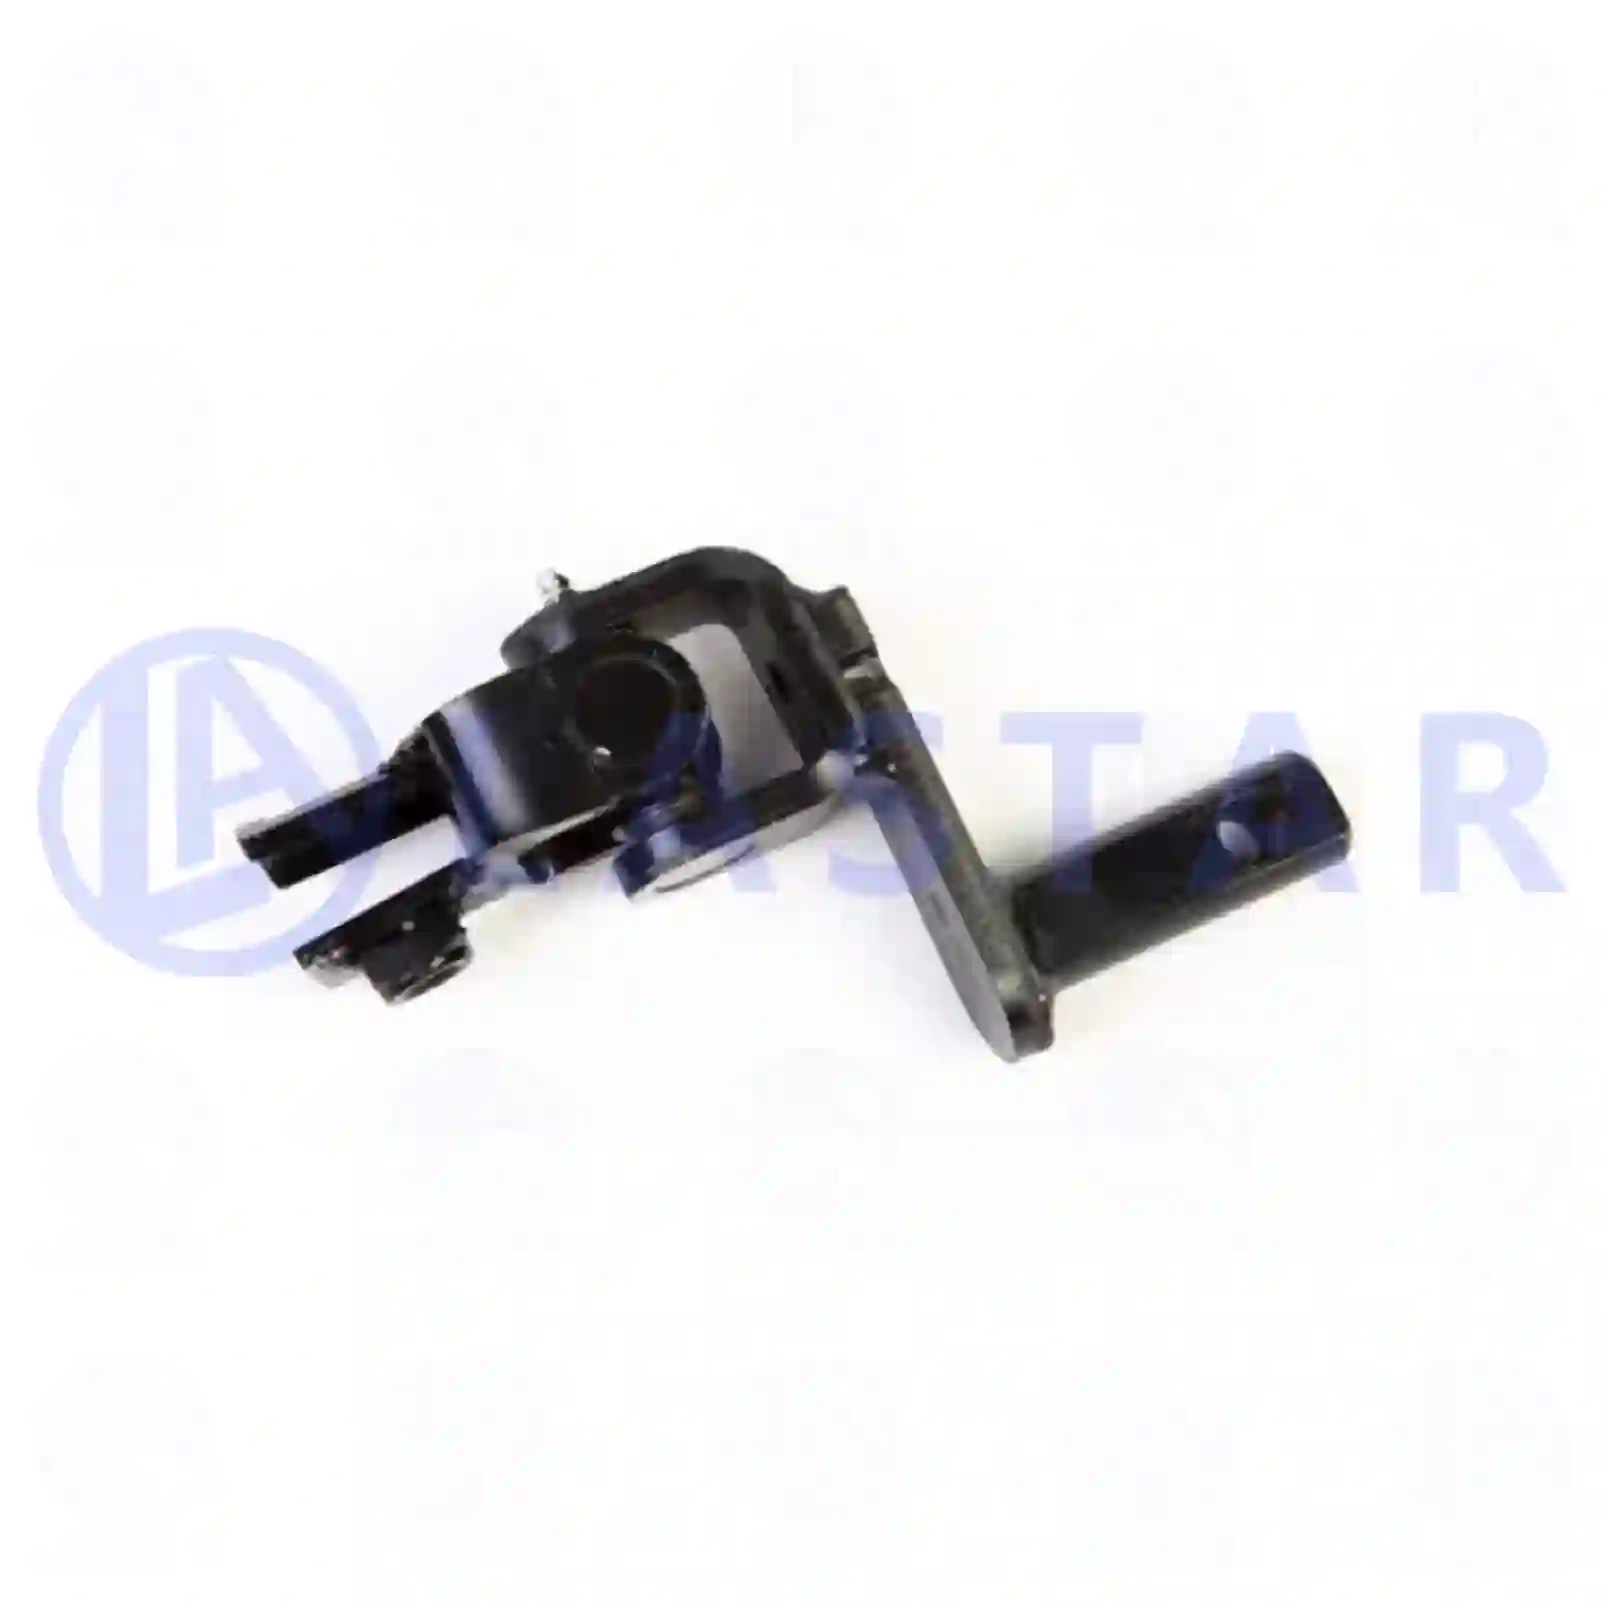 Universal joint, gear shift rod, 77734058, 1768957, ZG30694-0008 ||  77734058 Lastar Spare Part | Truck Spare Parts, Auotomotive Spare Parts Universal joint, gear shift rod, 77734058, 1768957, ZG30694-0008 ||  77734058 Lastar Spare Part | Truck Spare Parts, Auotomotive Spare Parts